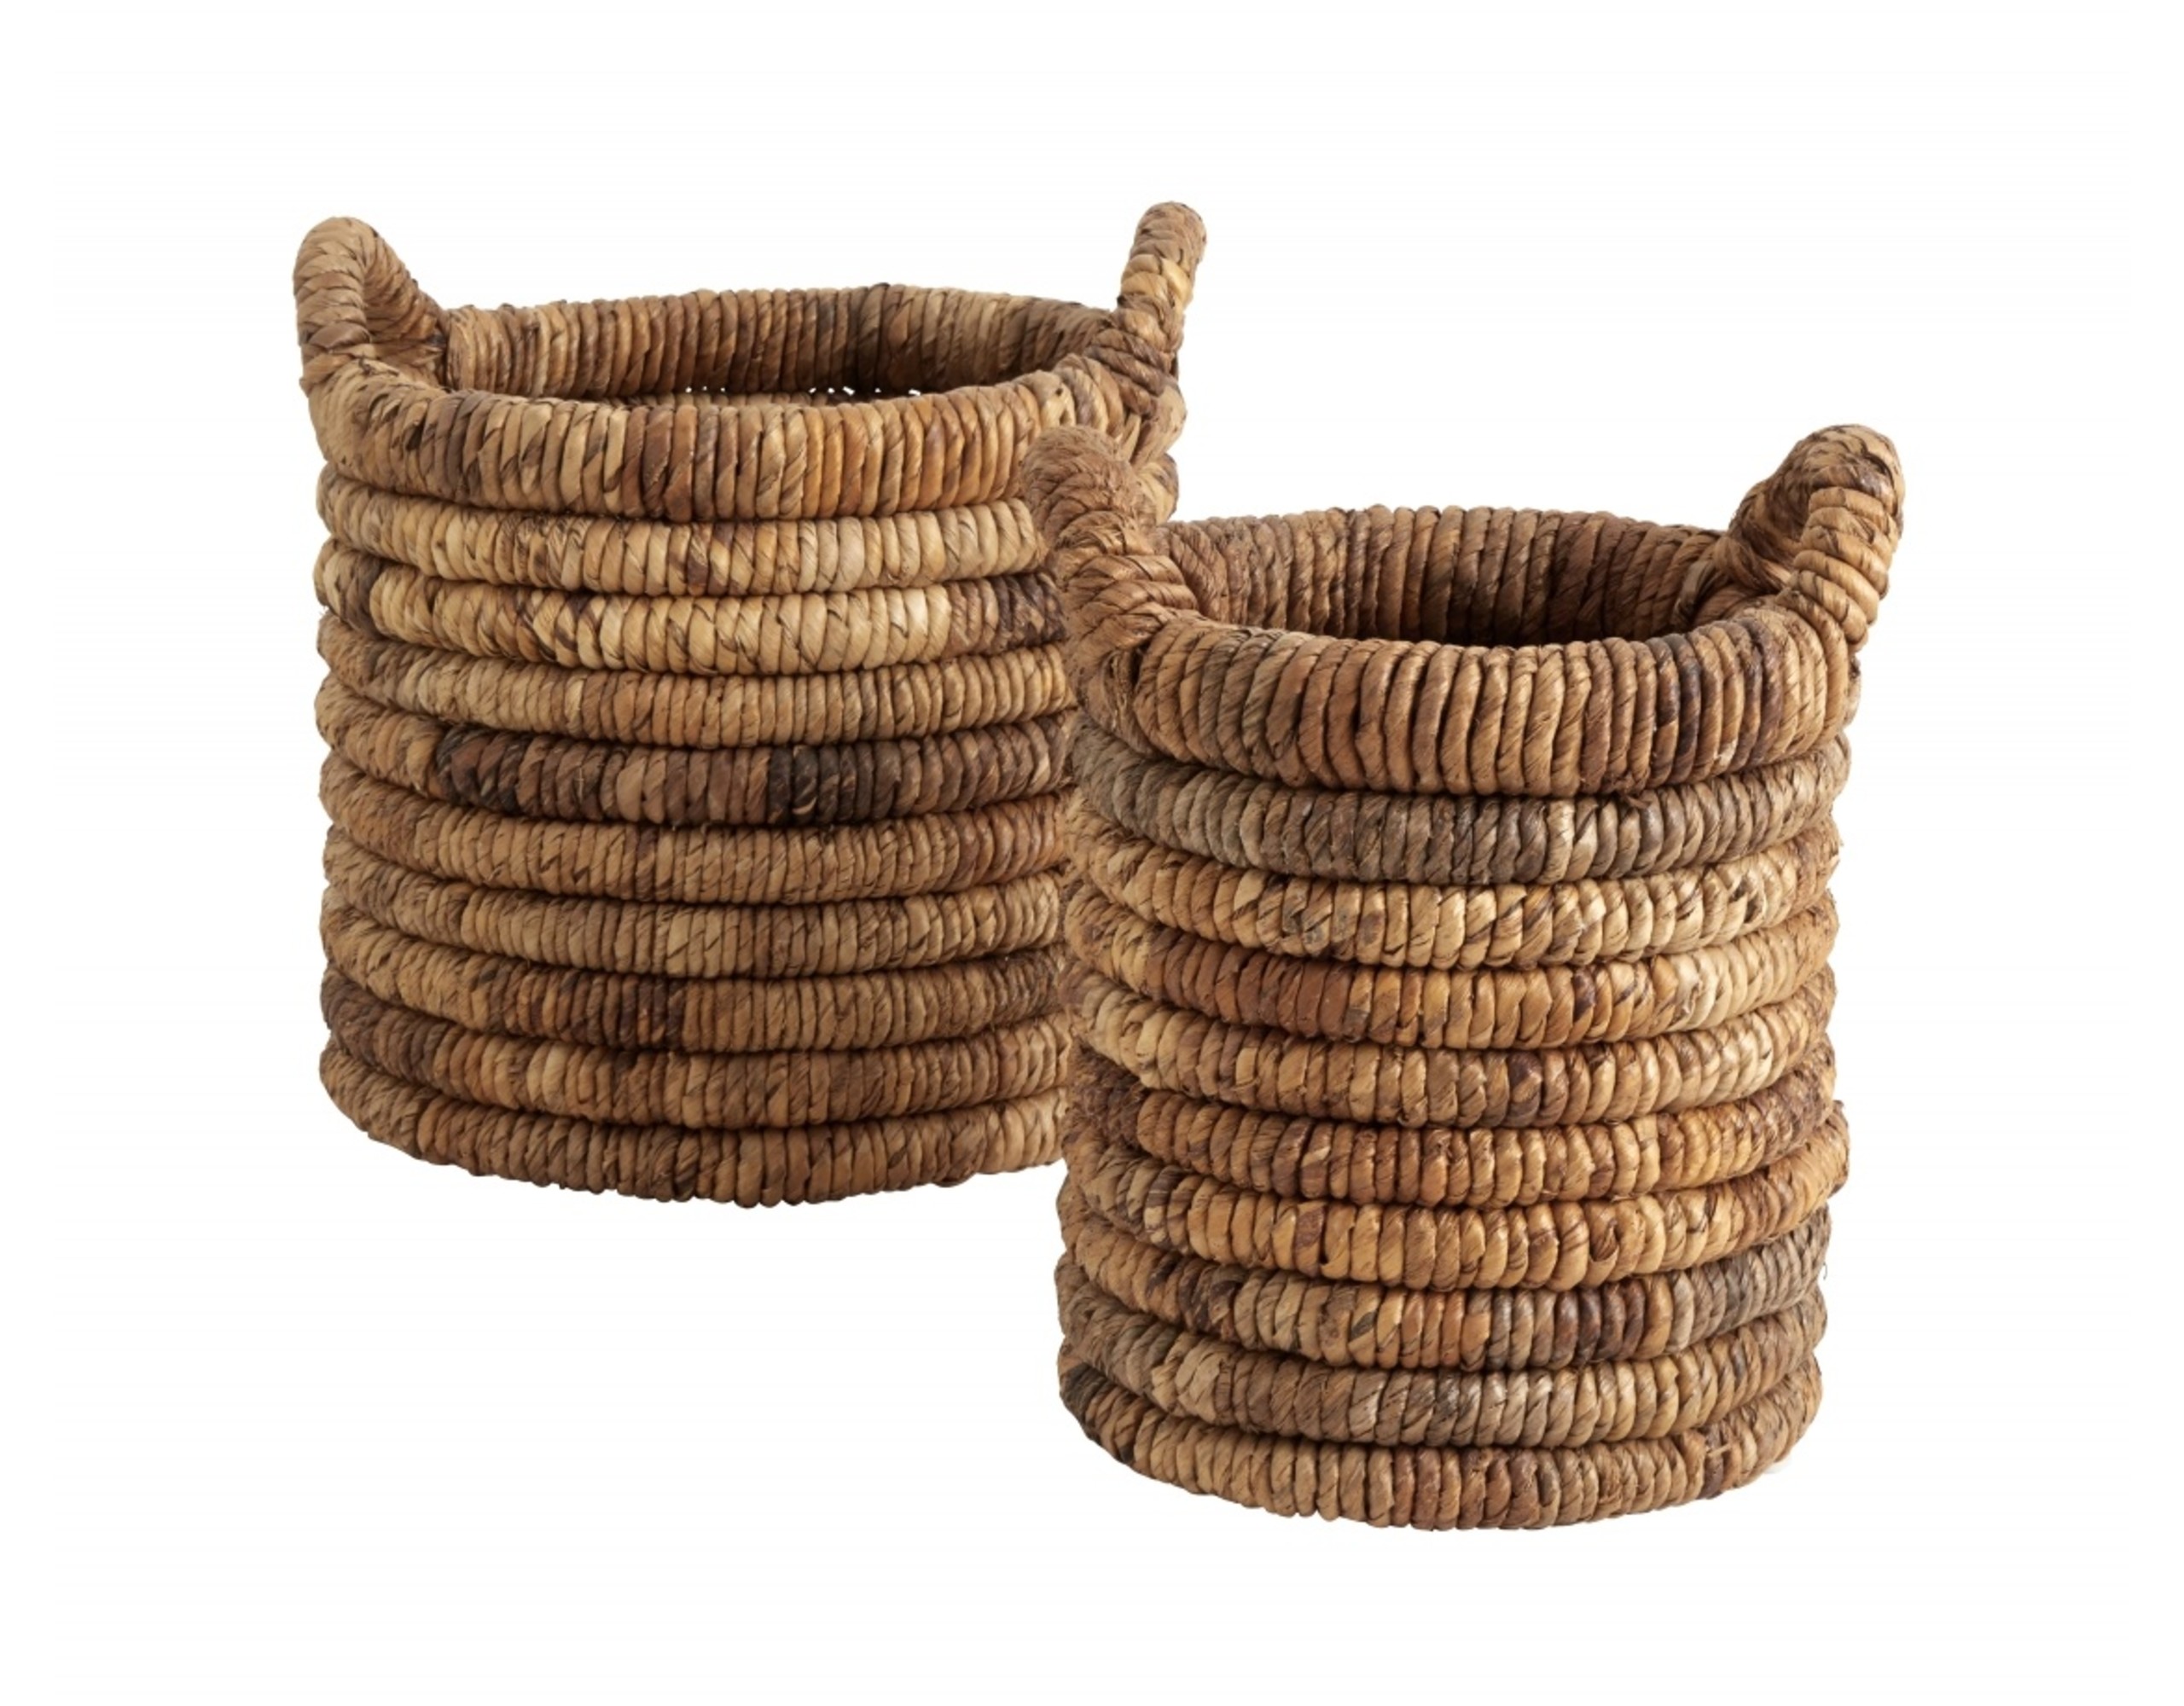 Nordal Abaca baskets natural - set of 2 pieces - LIVING AND CO.